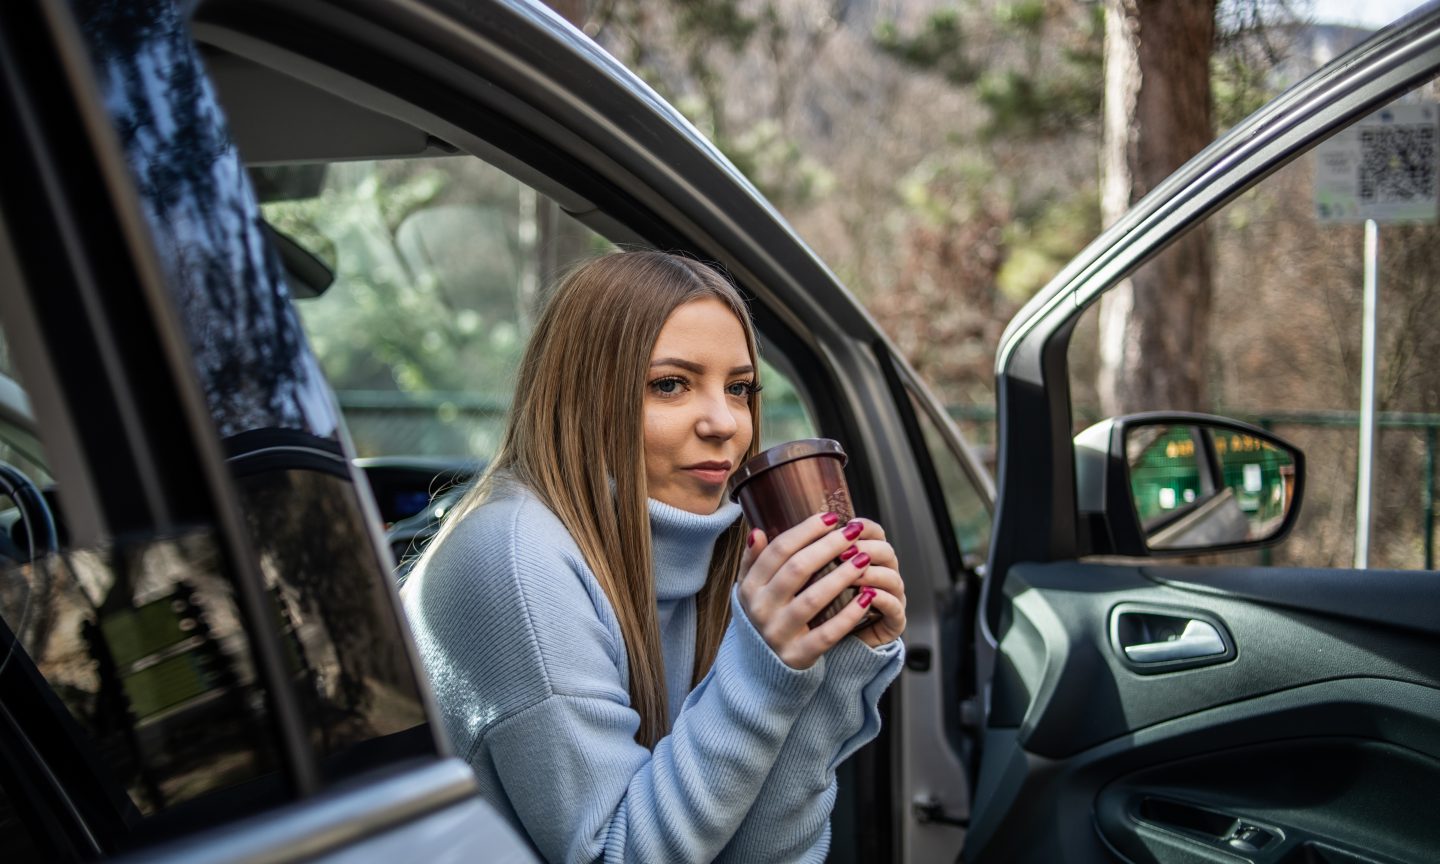 Root Auto Insurance Review 2022: Pros and Cons - NerdWallet